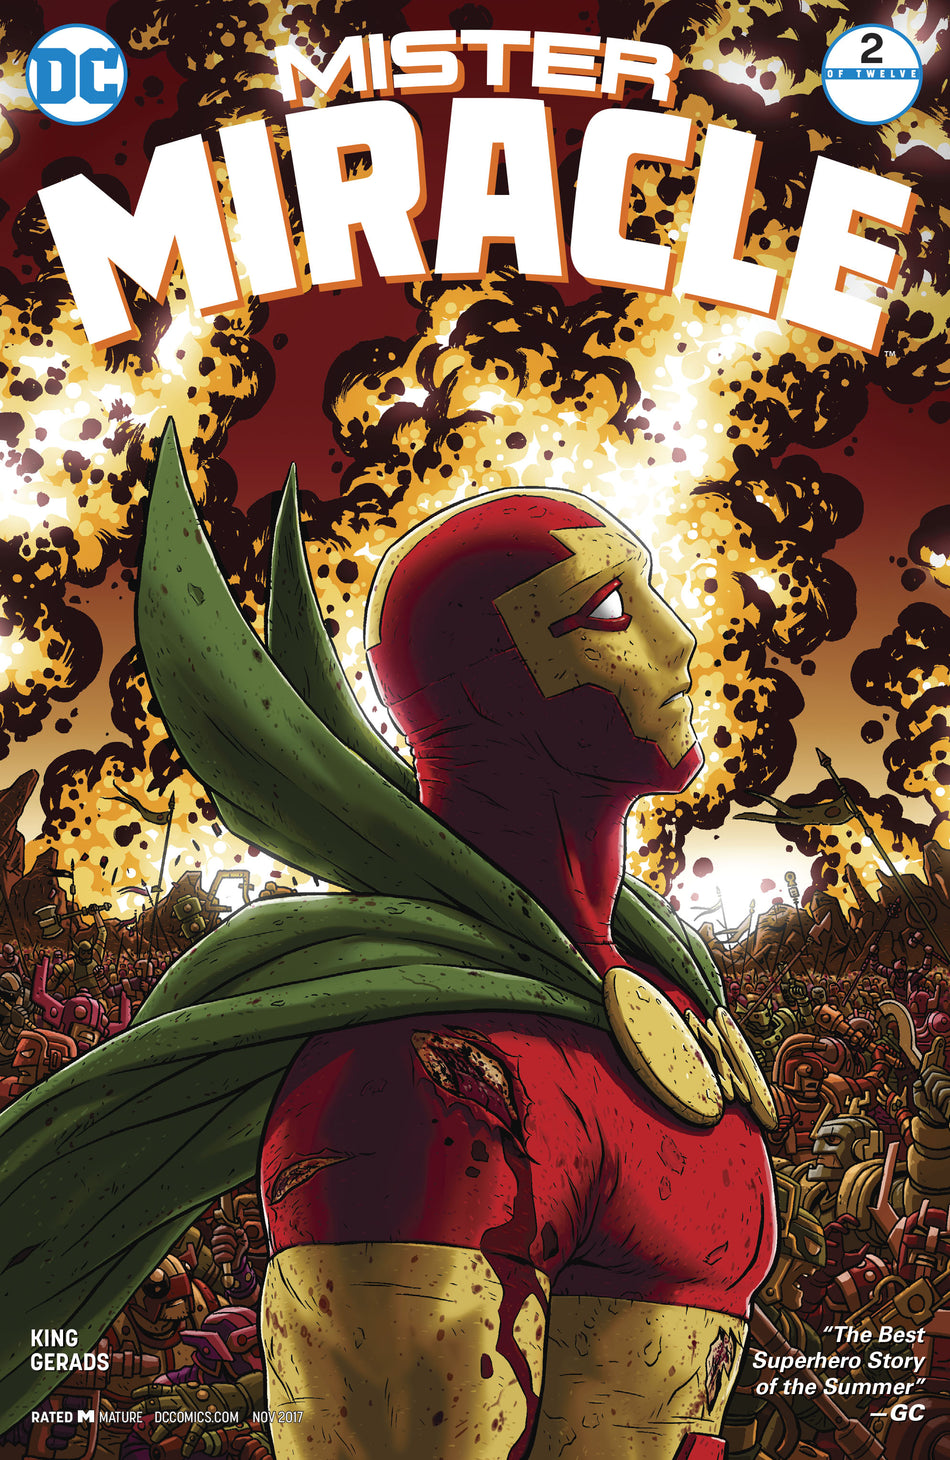 Photo of Mister Miracle Issue 2 (of 12) comic sold by Stronghold Collectibles